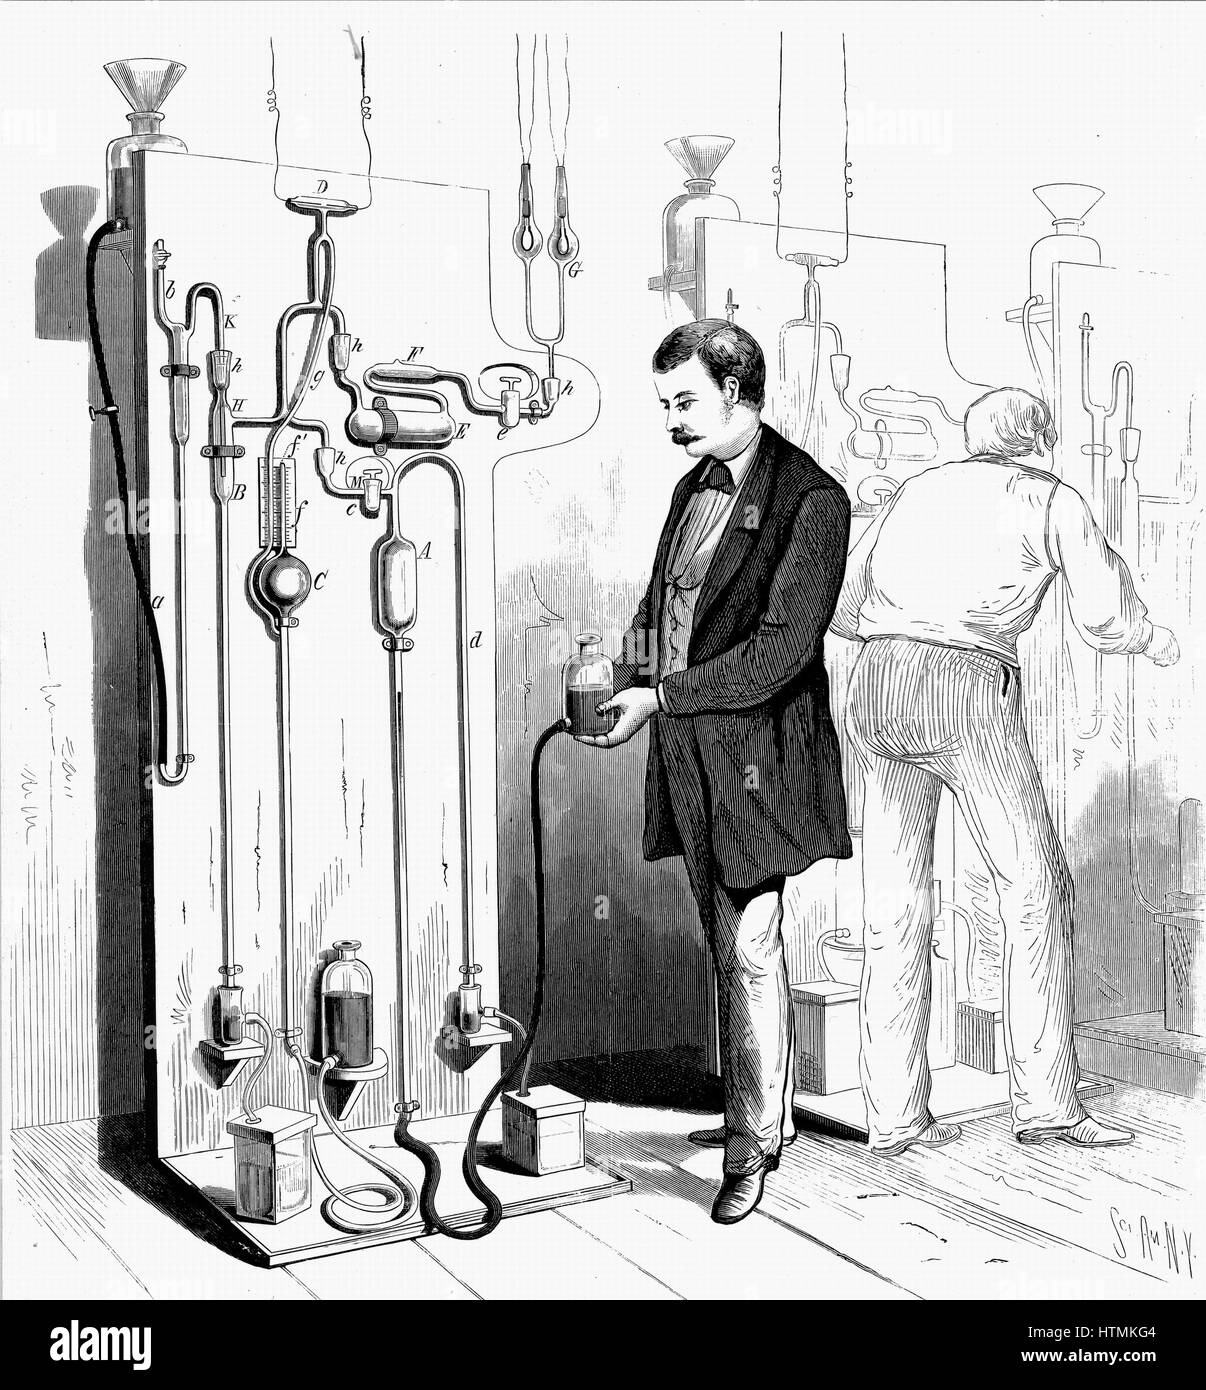 Vacuum apparatus used to exhaust Edison incandescent light bulbs at G (centre top). From Scientific American, New York, 1880. Engraving Stock Photo